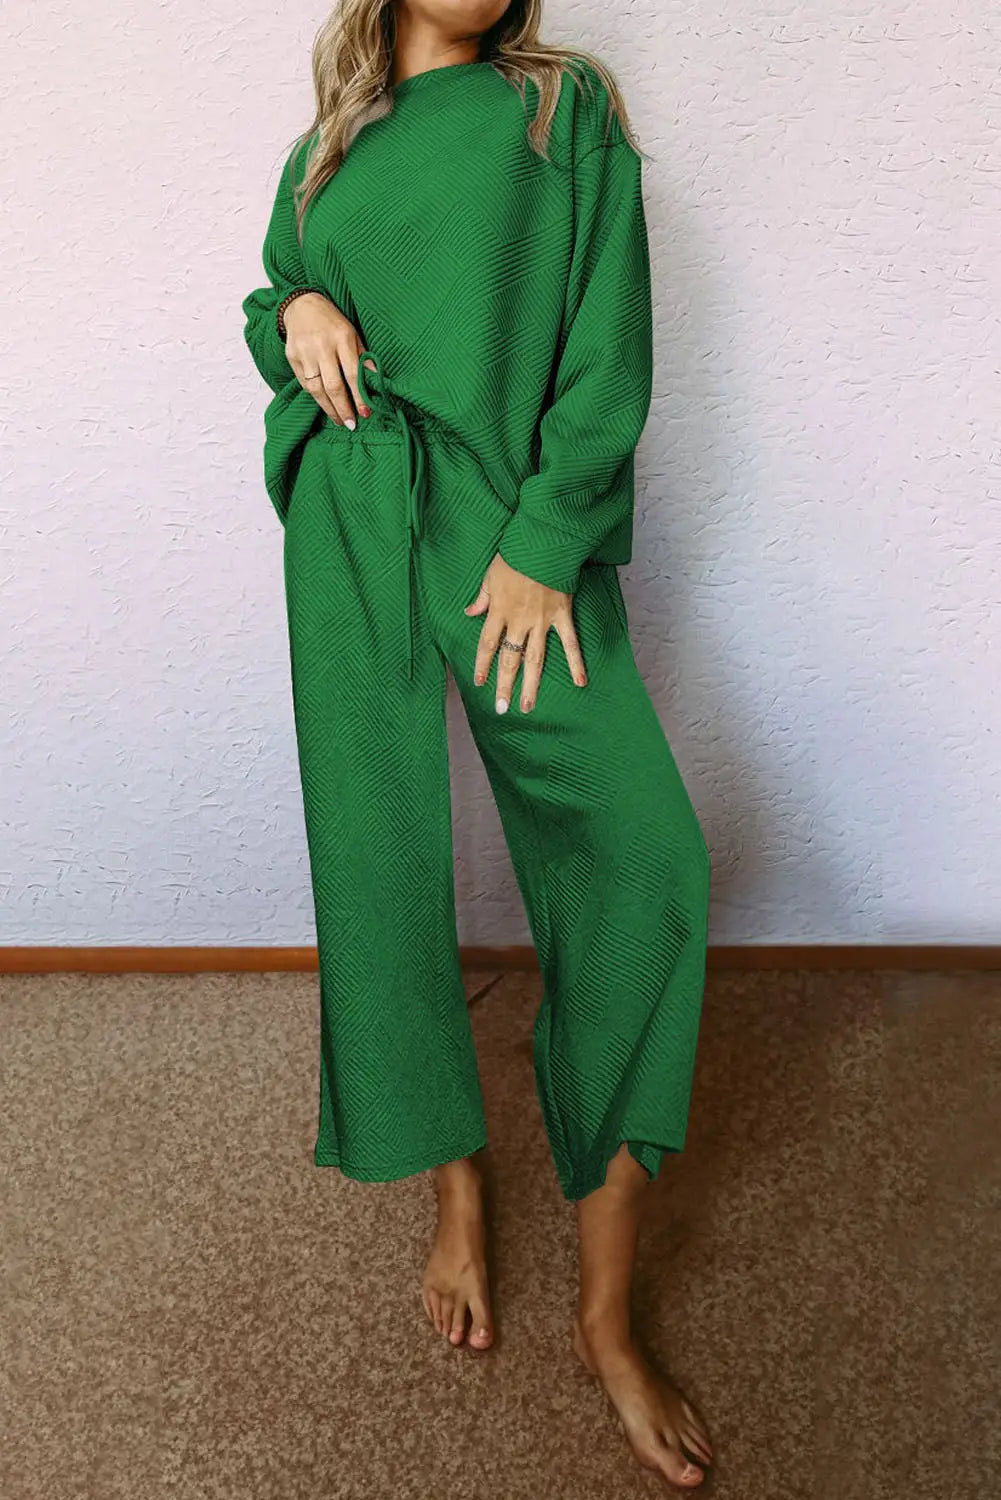 Dark green ultra loose textured 2pcs slouchy outfit - 2xl 95% polyester + 5% elastane pants sets